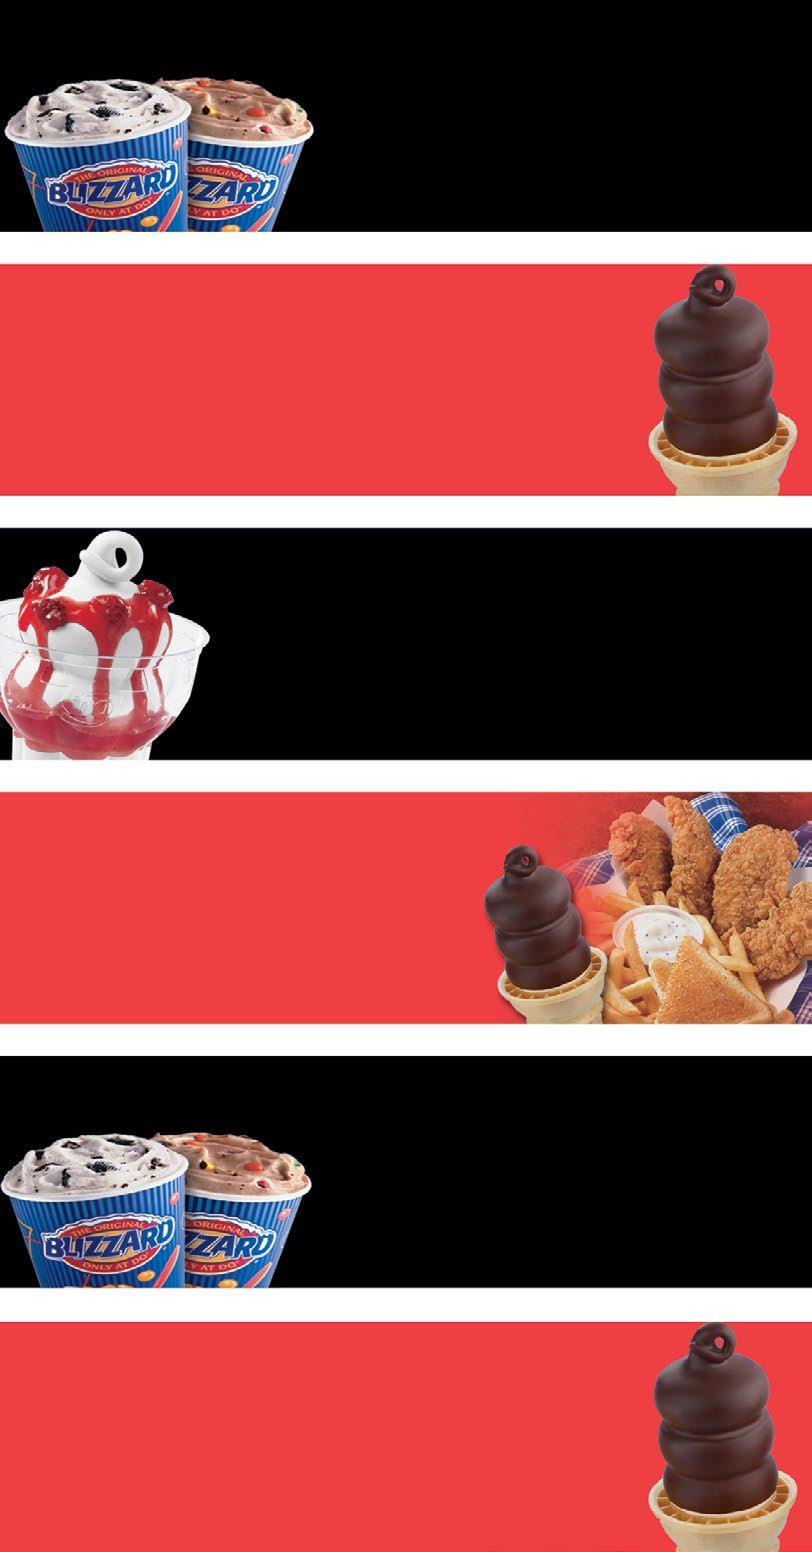 Buy 1 Medium Blizzard or Larger, Get 1 of Equal Size Buy 1 Large Dip Cone, Get 1 Small Dip Cone Buy 1 Medium Sundae or Larger, Get 1 of Equal Size Half-Price Must present this coupon.